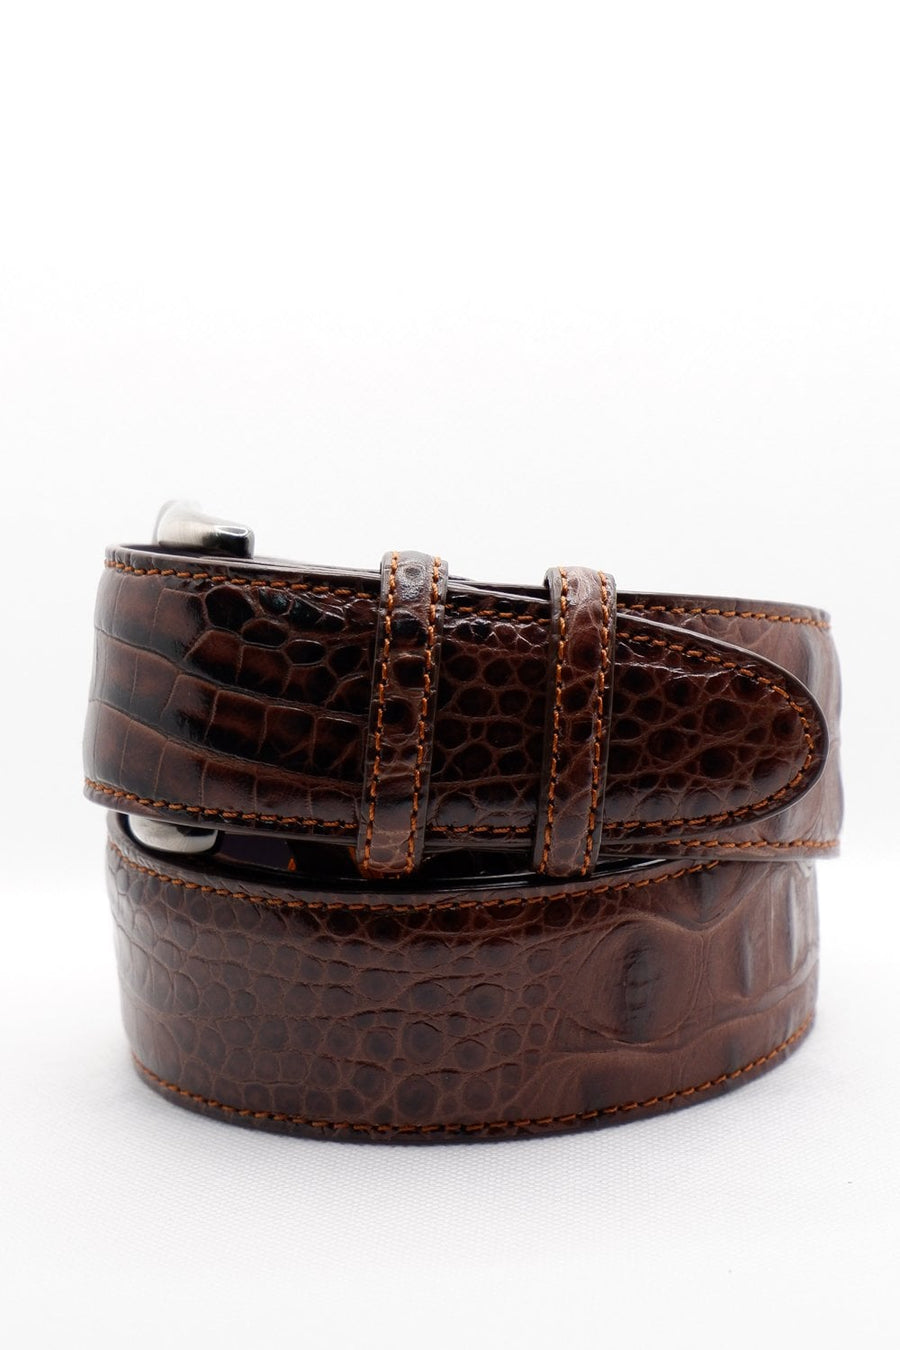 Buy the Elliot Rhodes Croc Jenny Belt in Brown/Black at Intro. Spend £50 for free UK delivery. Official stockists. We ship worldwide.